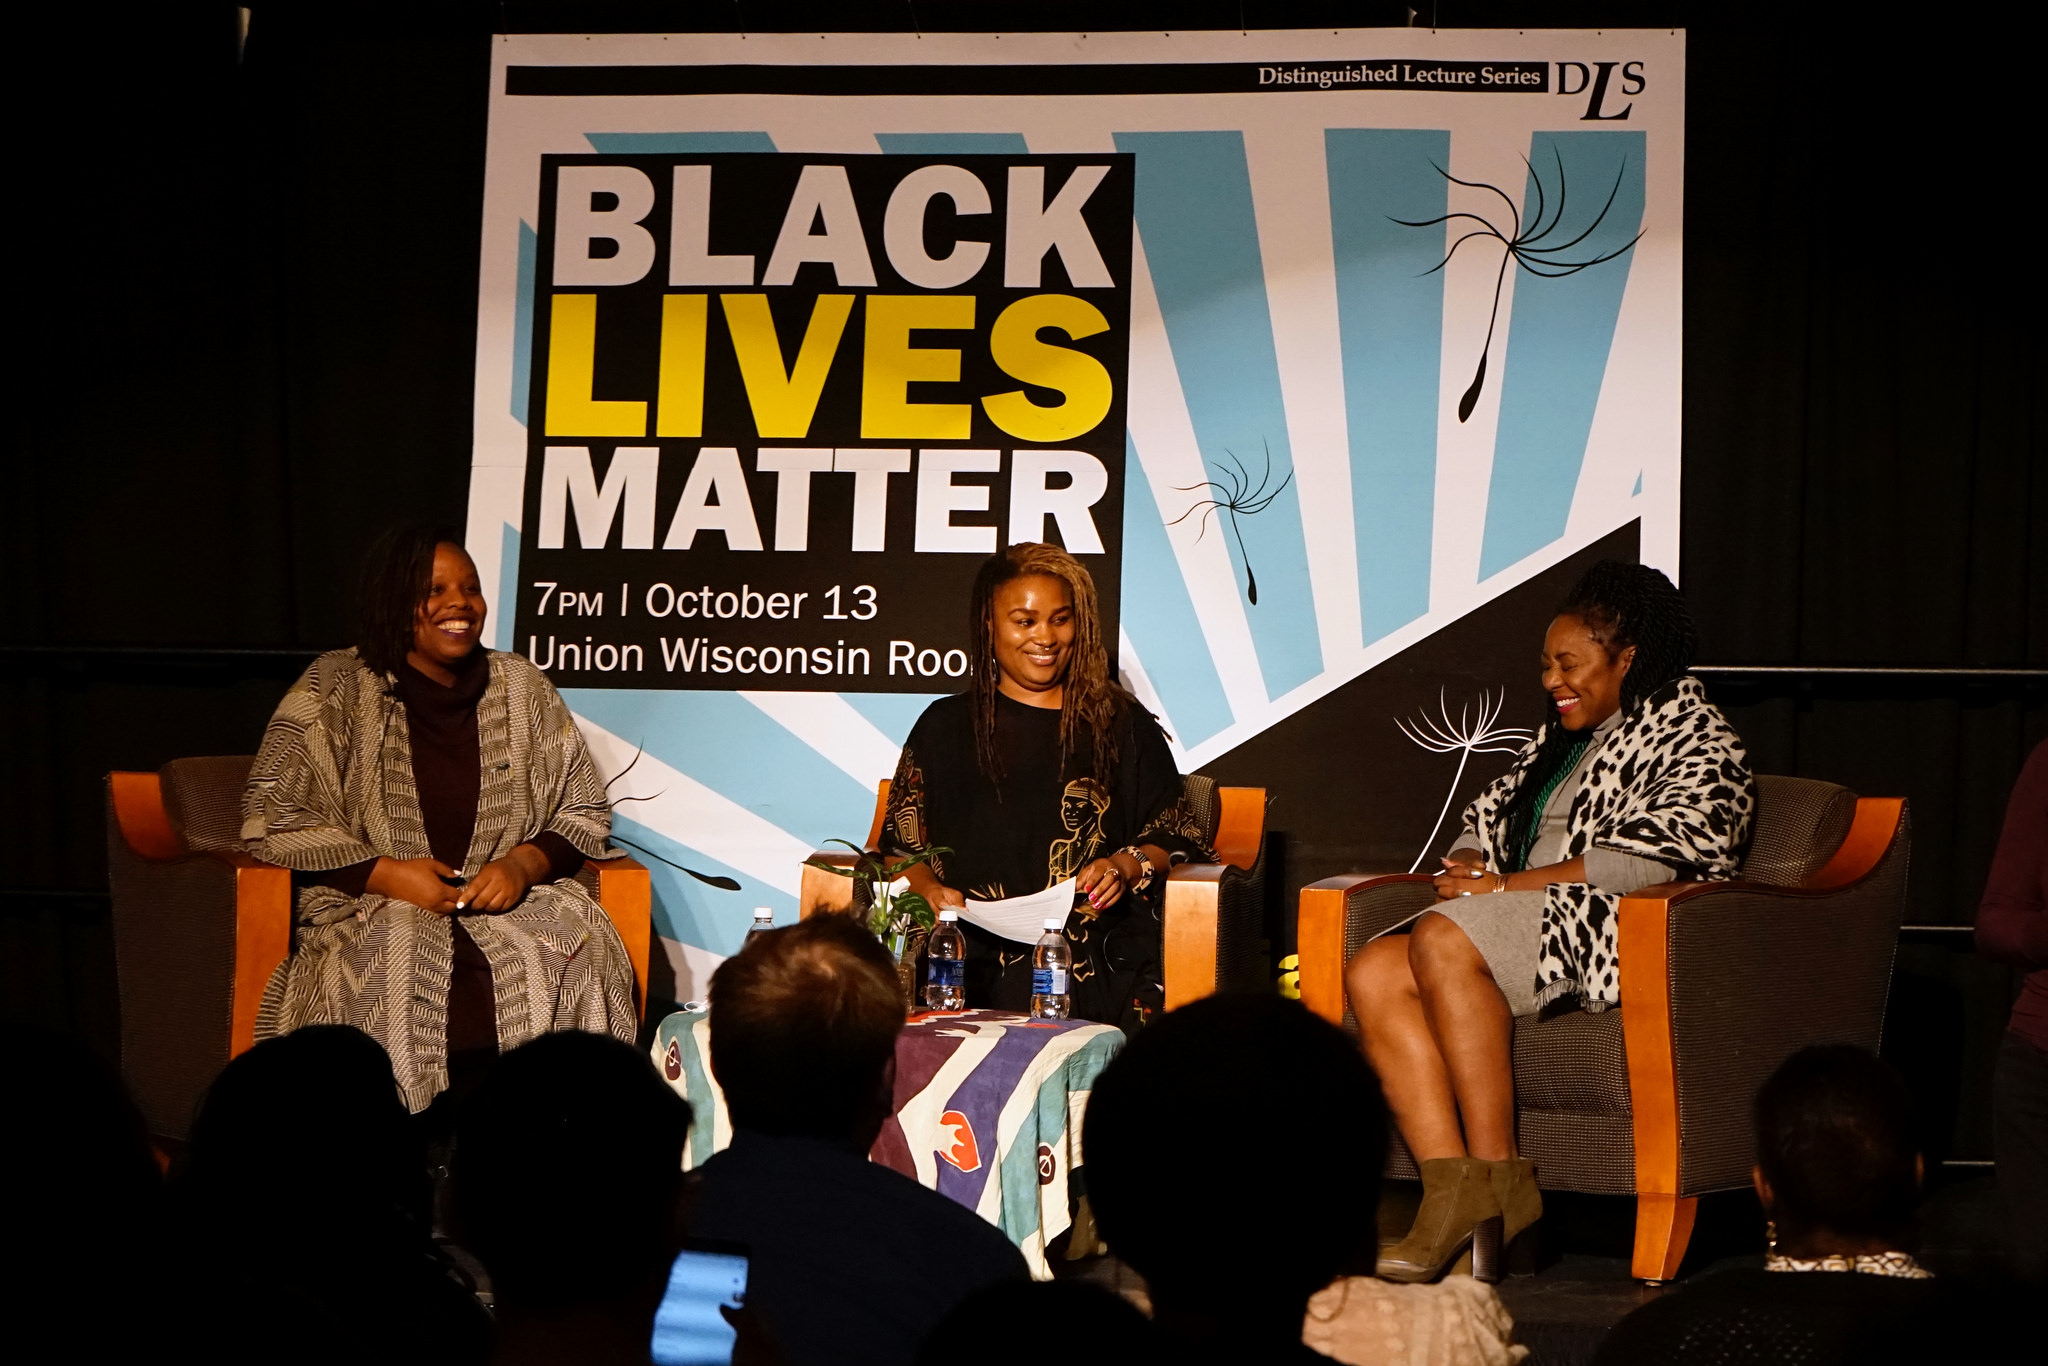 Co-founders of Black Lives Matter Patrisse Cullors (left) and Alicia Garza answered questions from the audience and moderator Charmaine Lang (center). (Photo by Adam Carr)